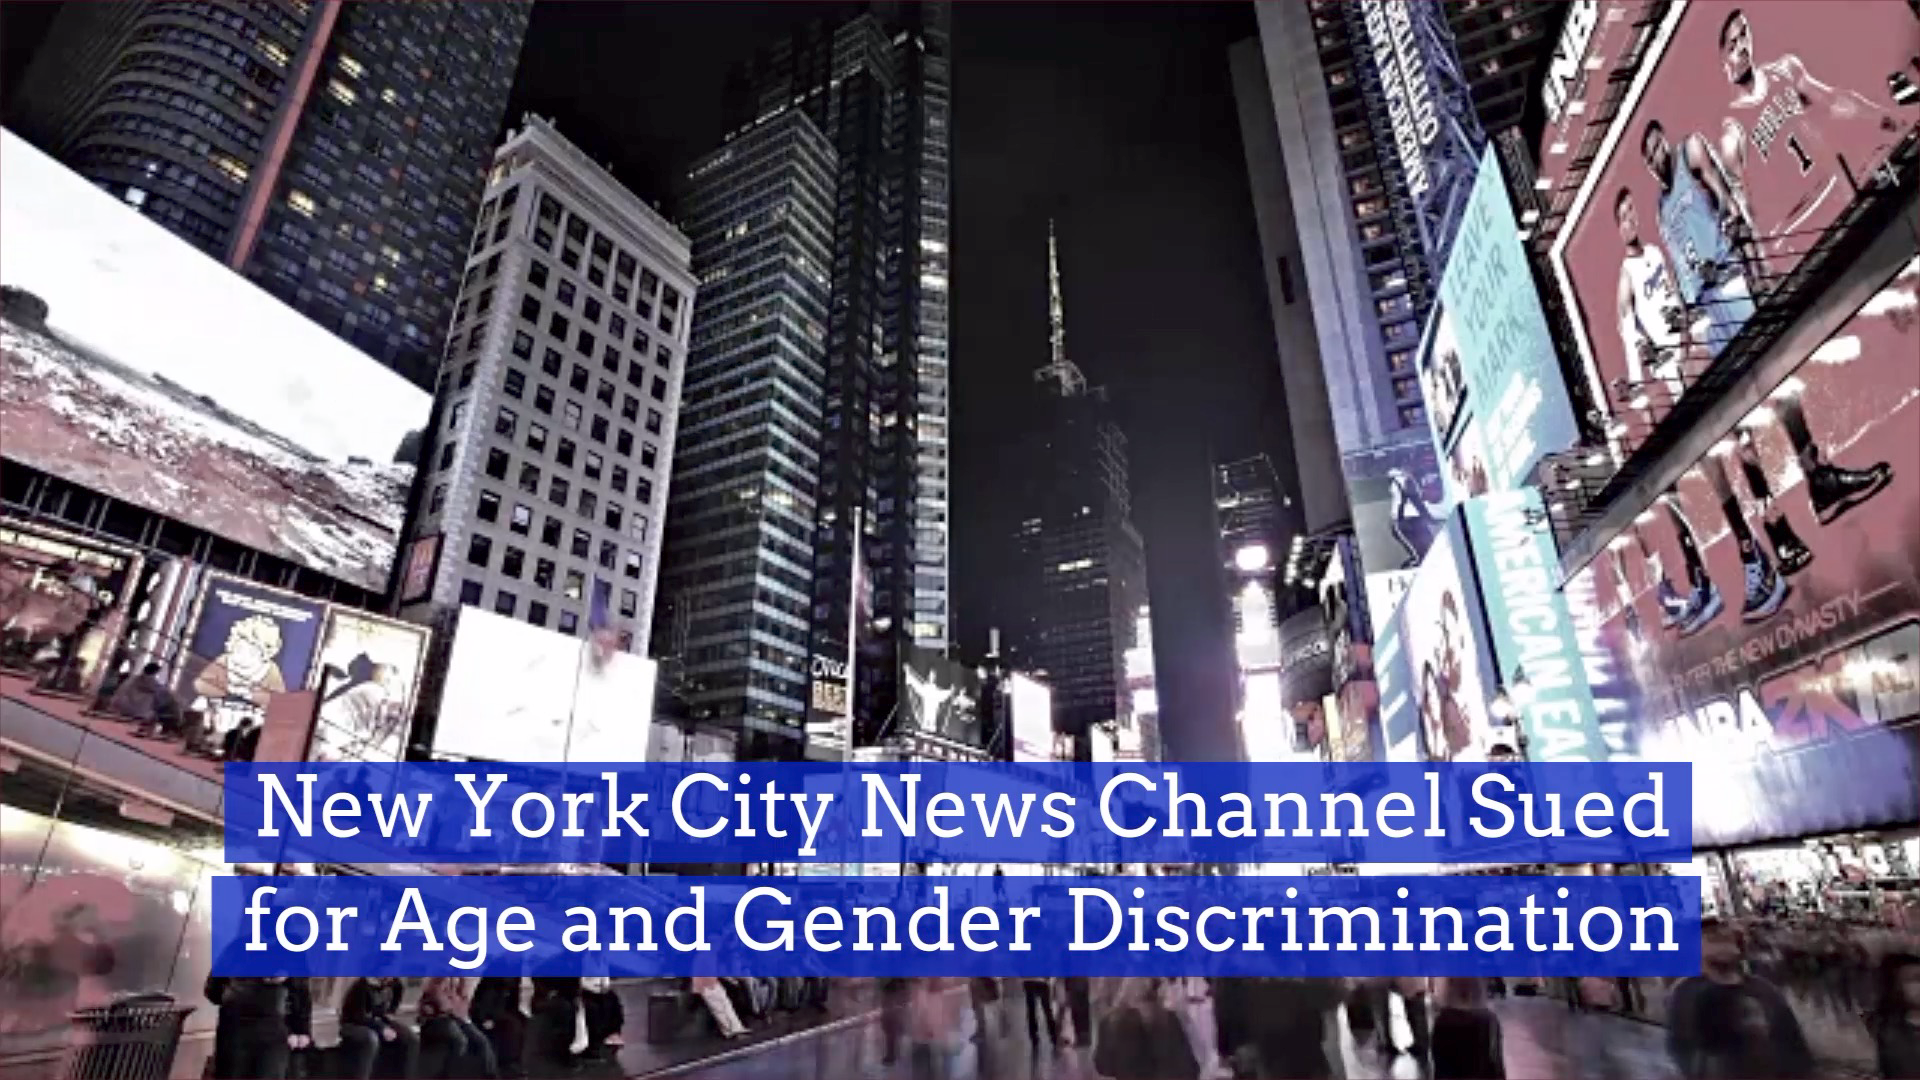 This New York News Channel Is Being Sued